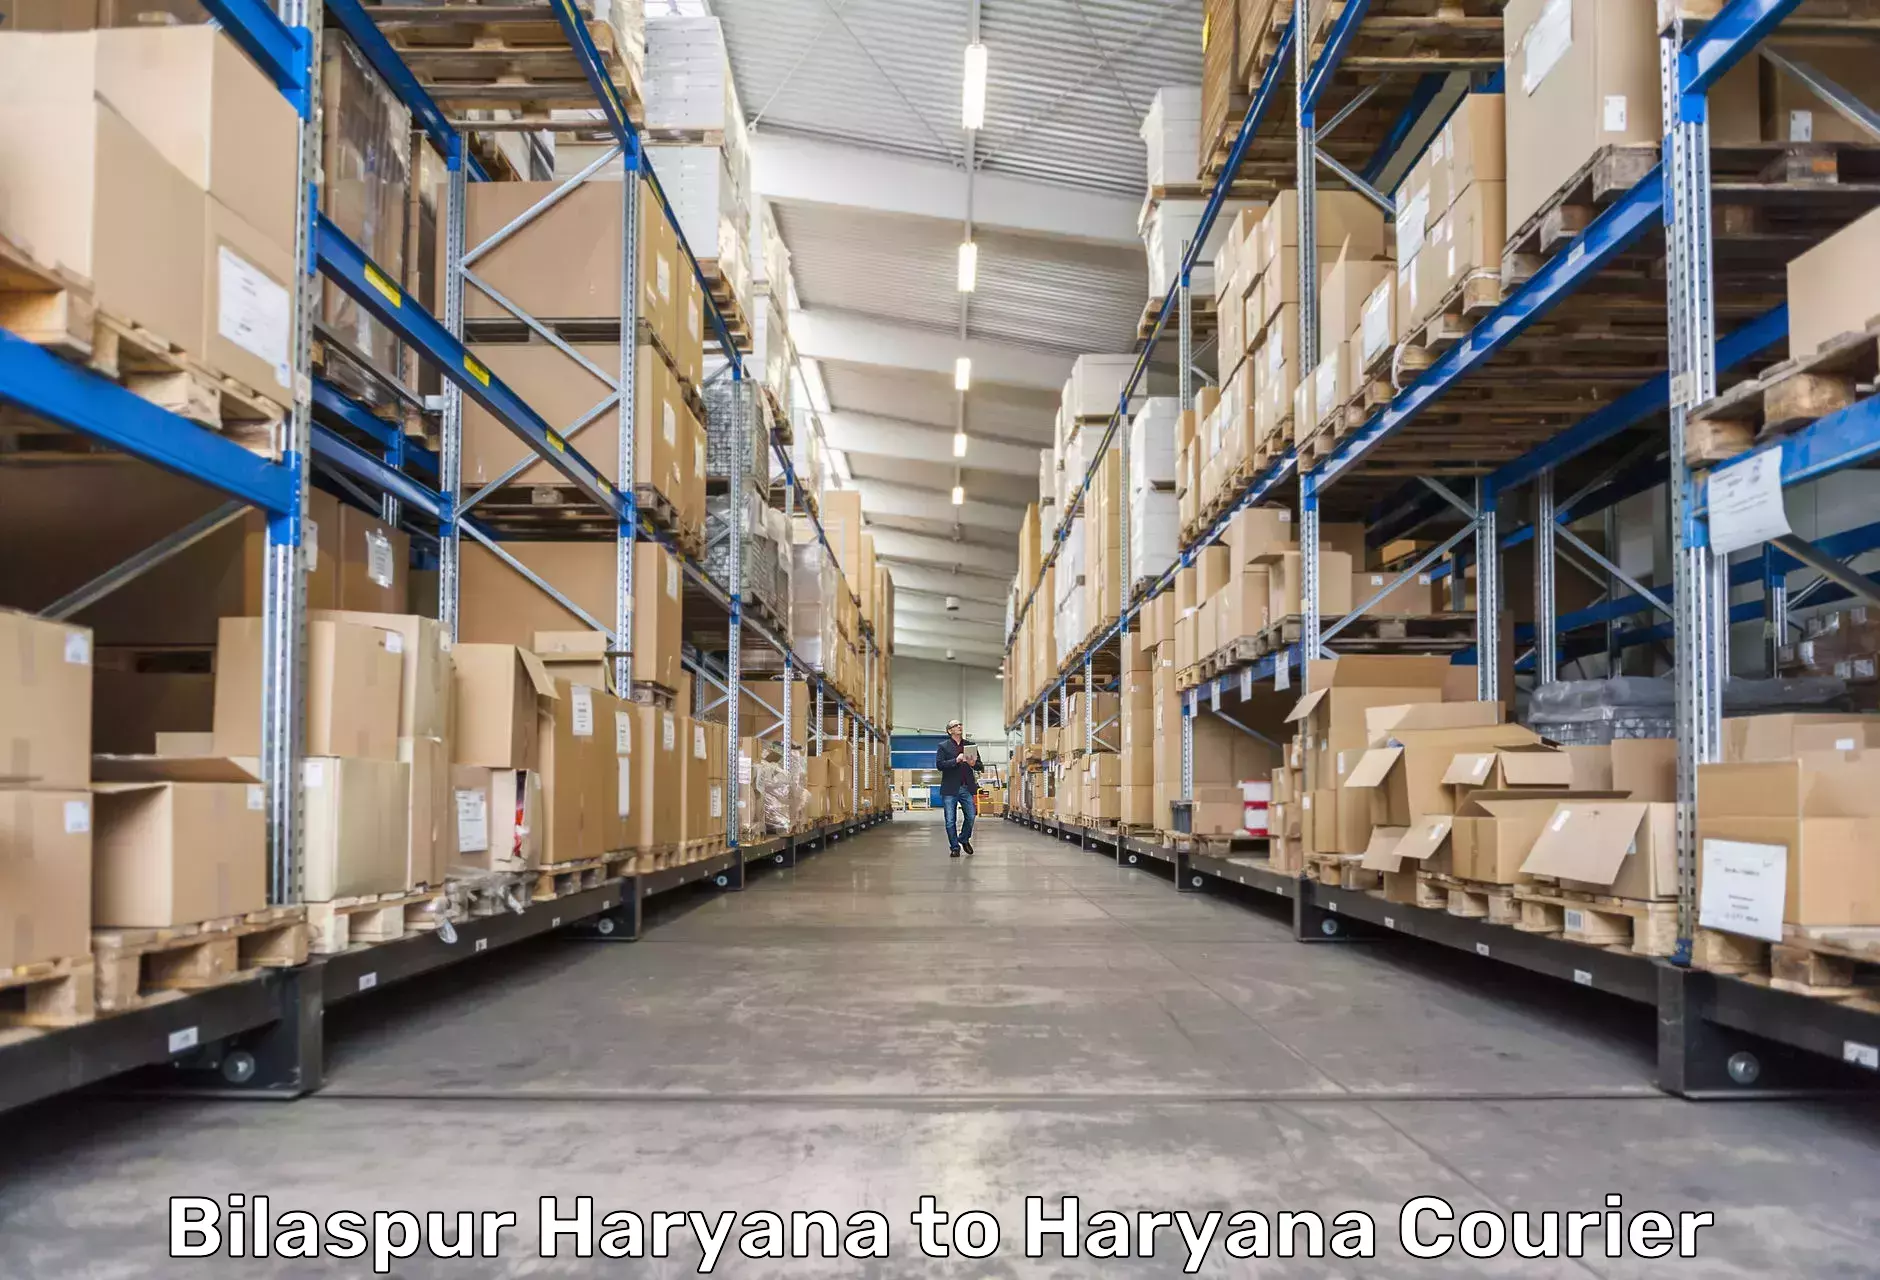 Overnight delivery services Bilaspur Haryana to Haryana